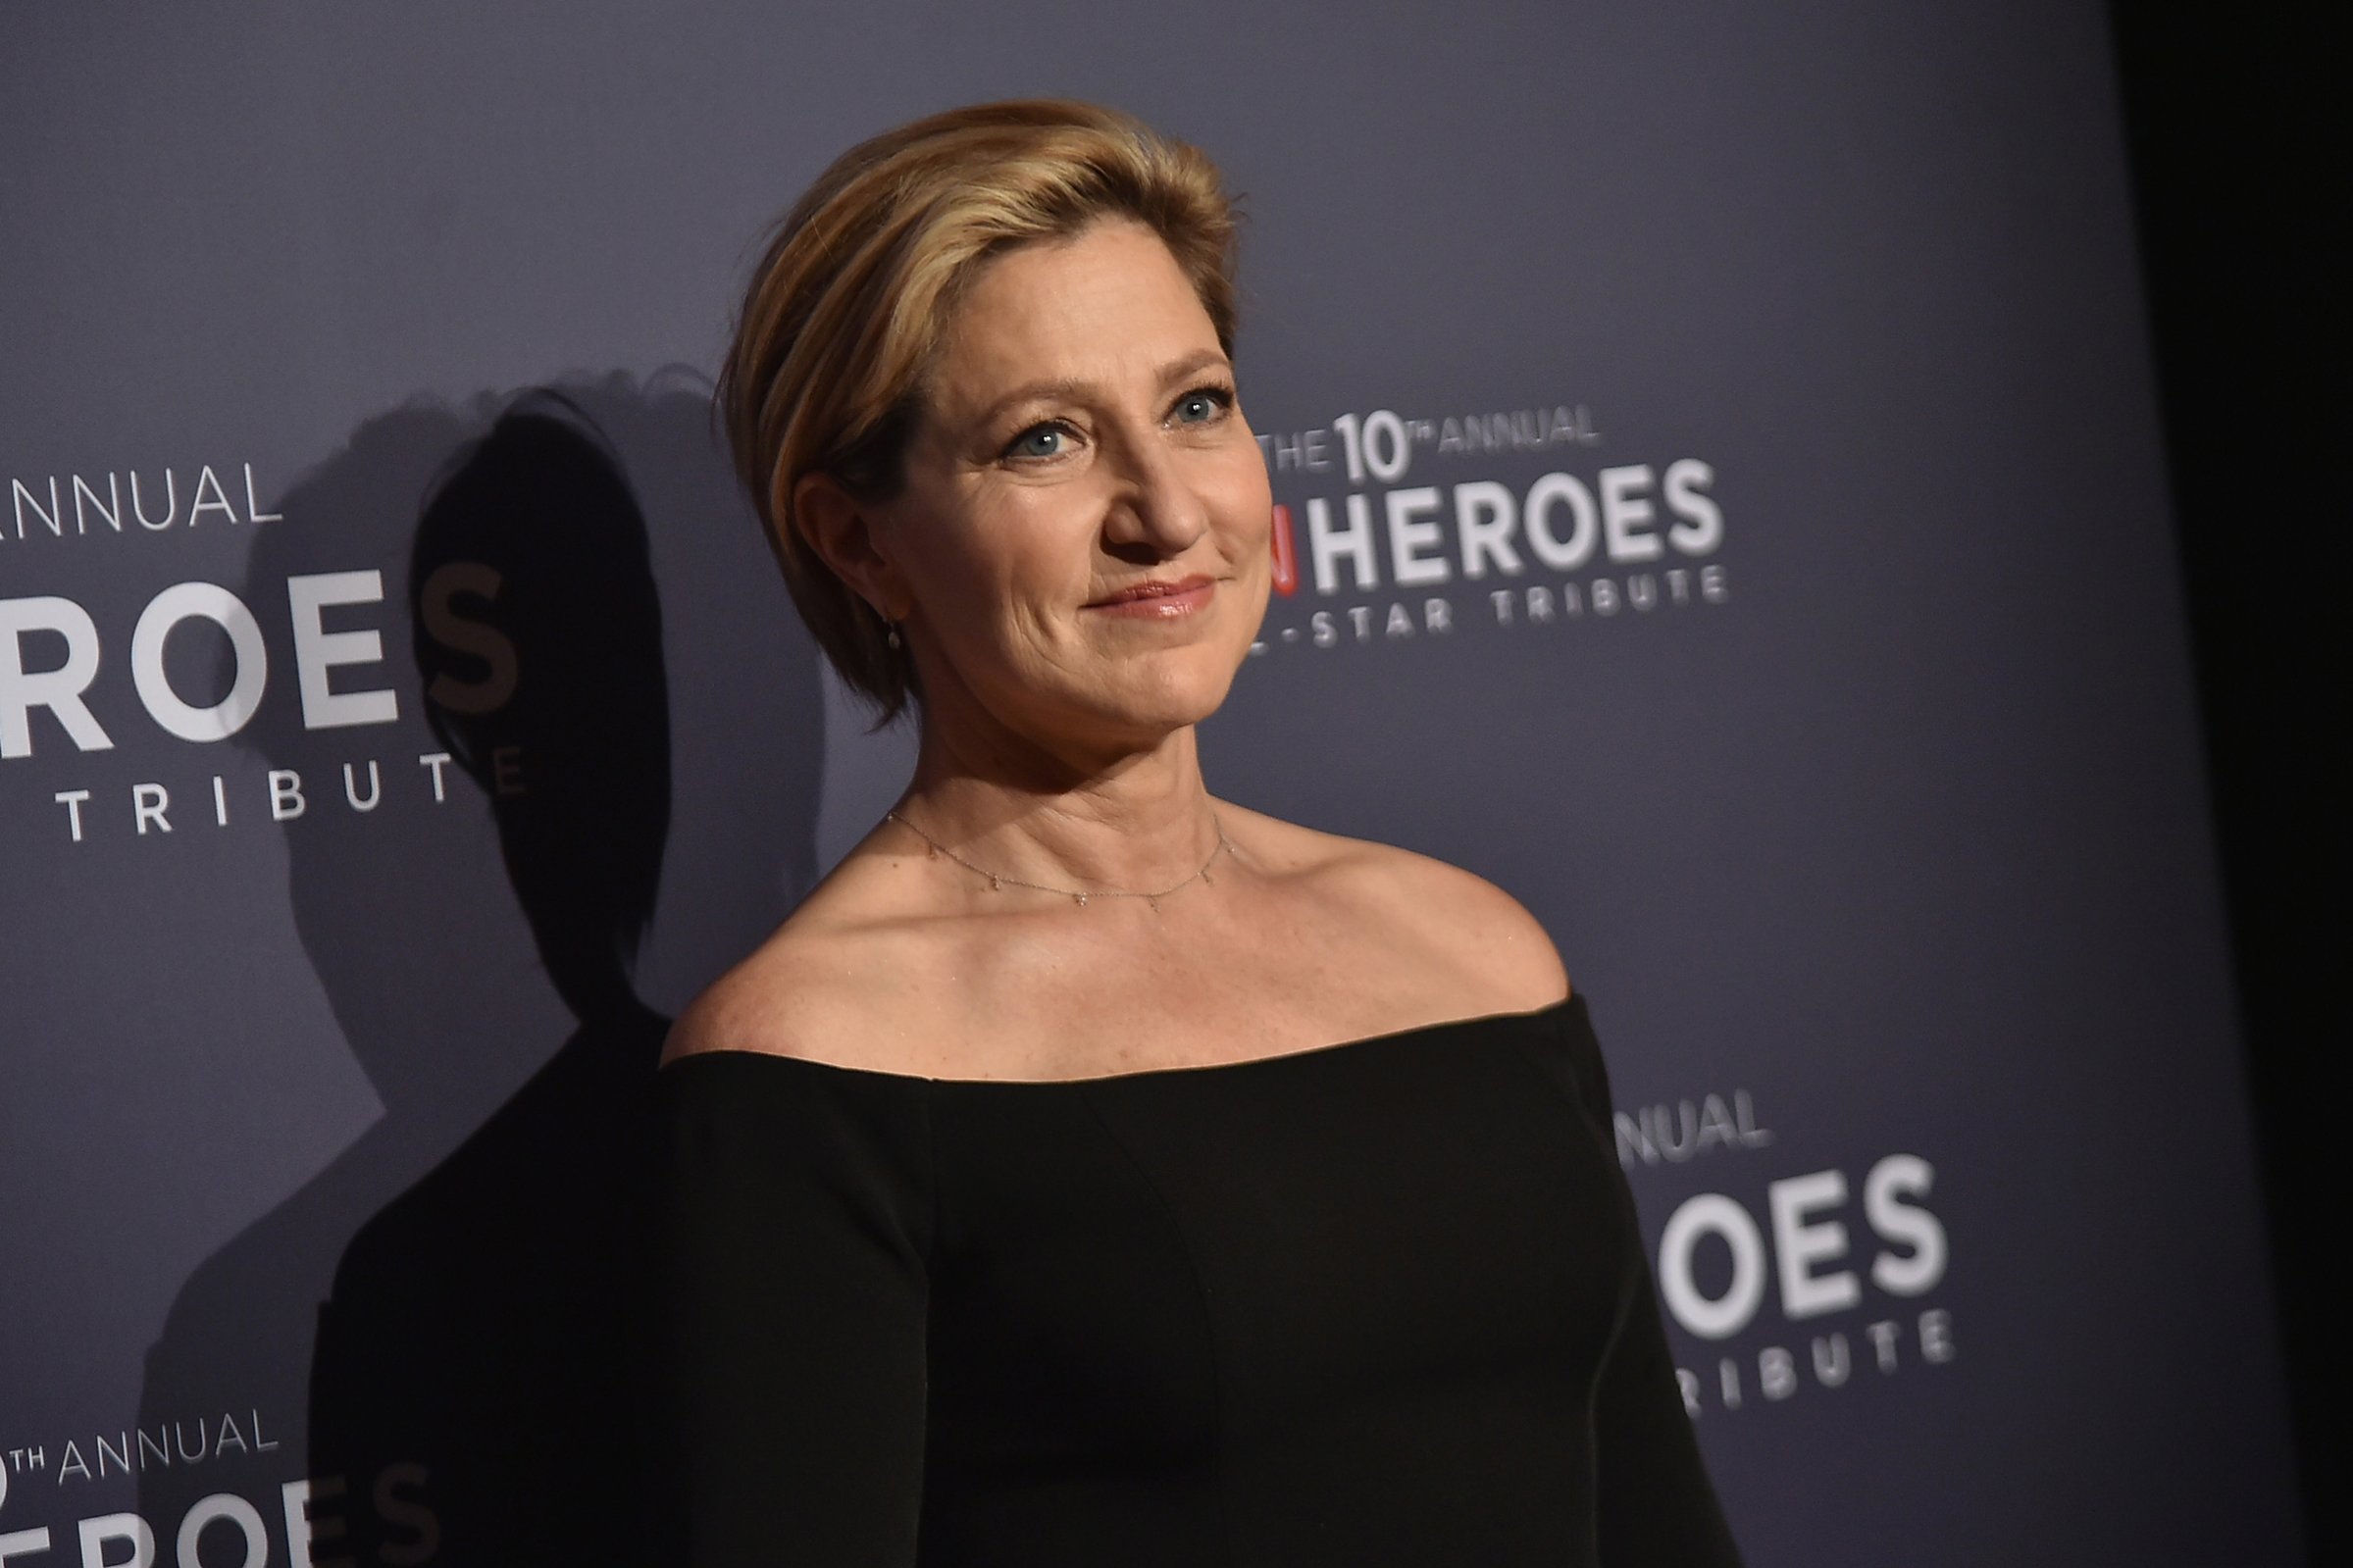 Edie Falco attends CNN Heroes Gala 2016 at the American Museum of Natural History on Dec. 11, 2016 in New York.